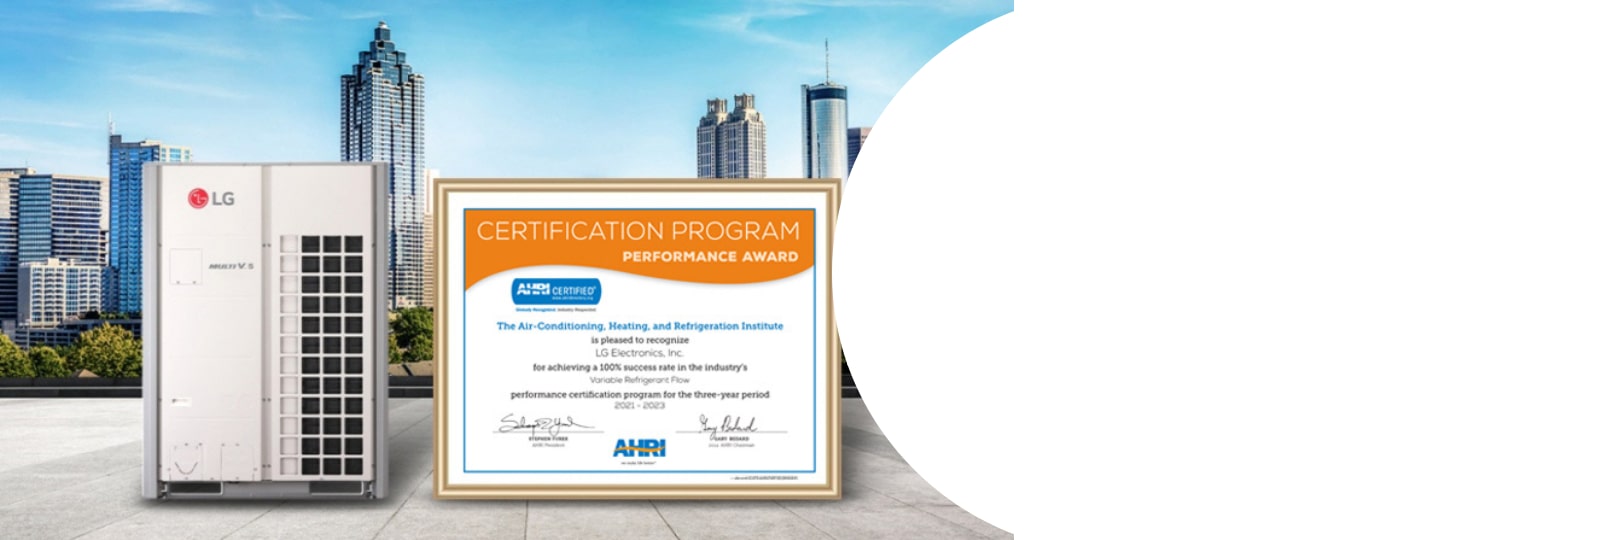 								LG Receives AHRI Performance Award For Seventh Consecutive Year							1